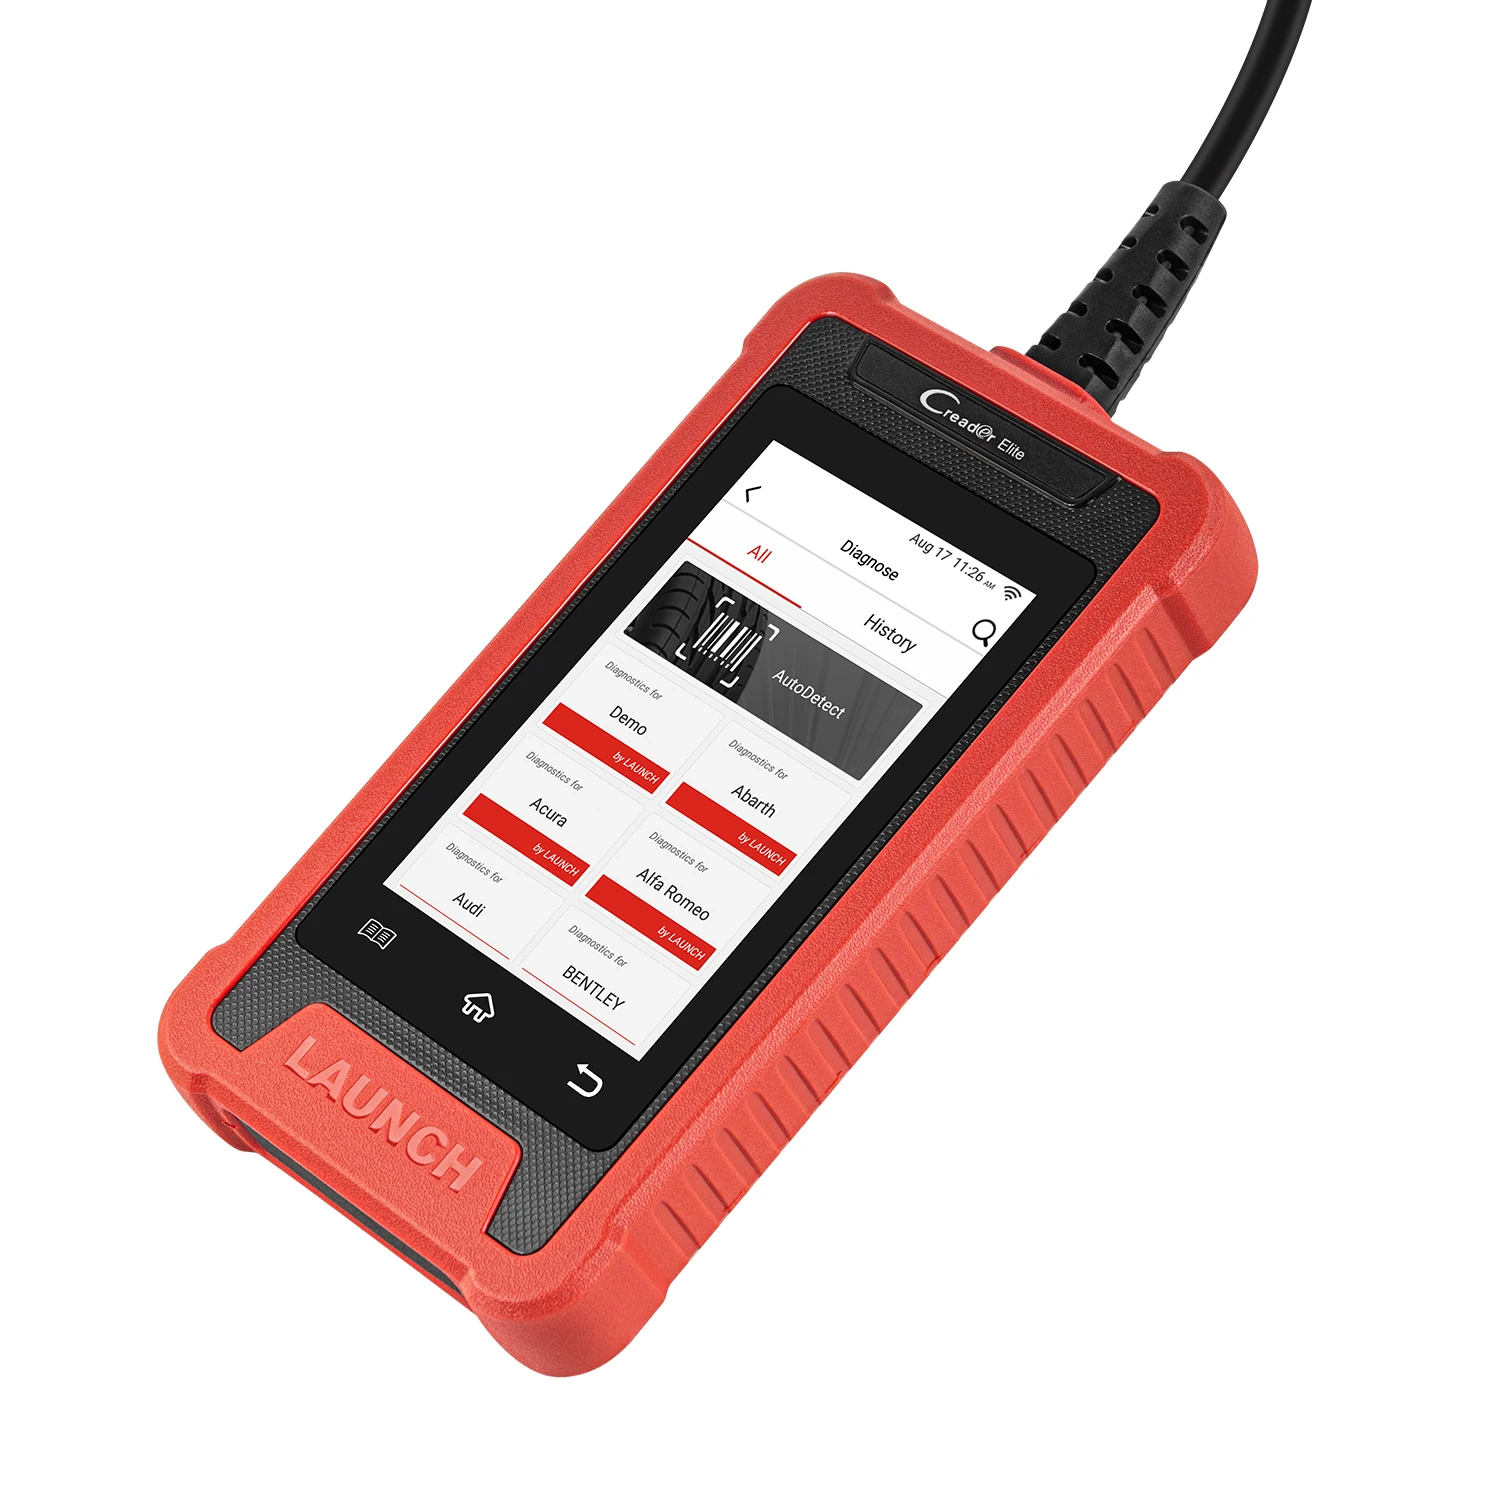 

LAUNCH Creader CRE200 OBD2 Code Reader Scanner Auto ABS SRS Diagnostic Tool Lifetime Free Update